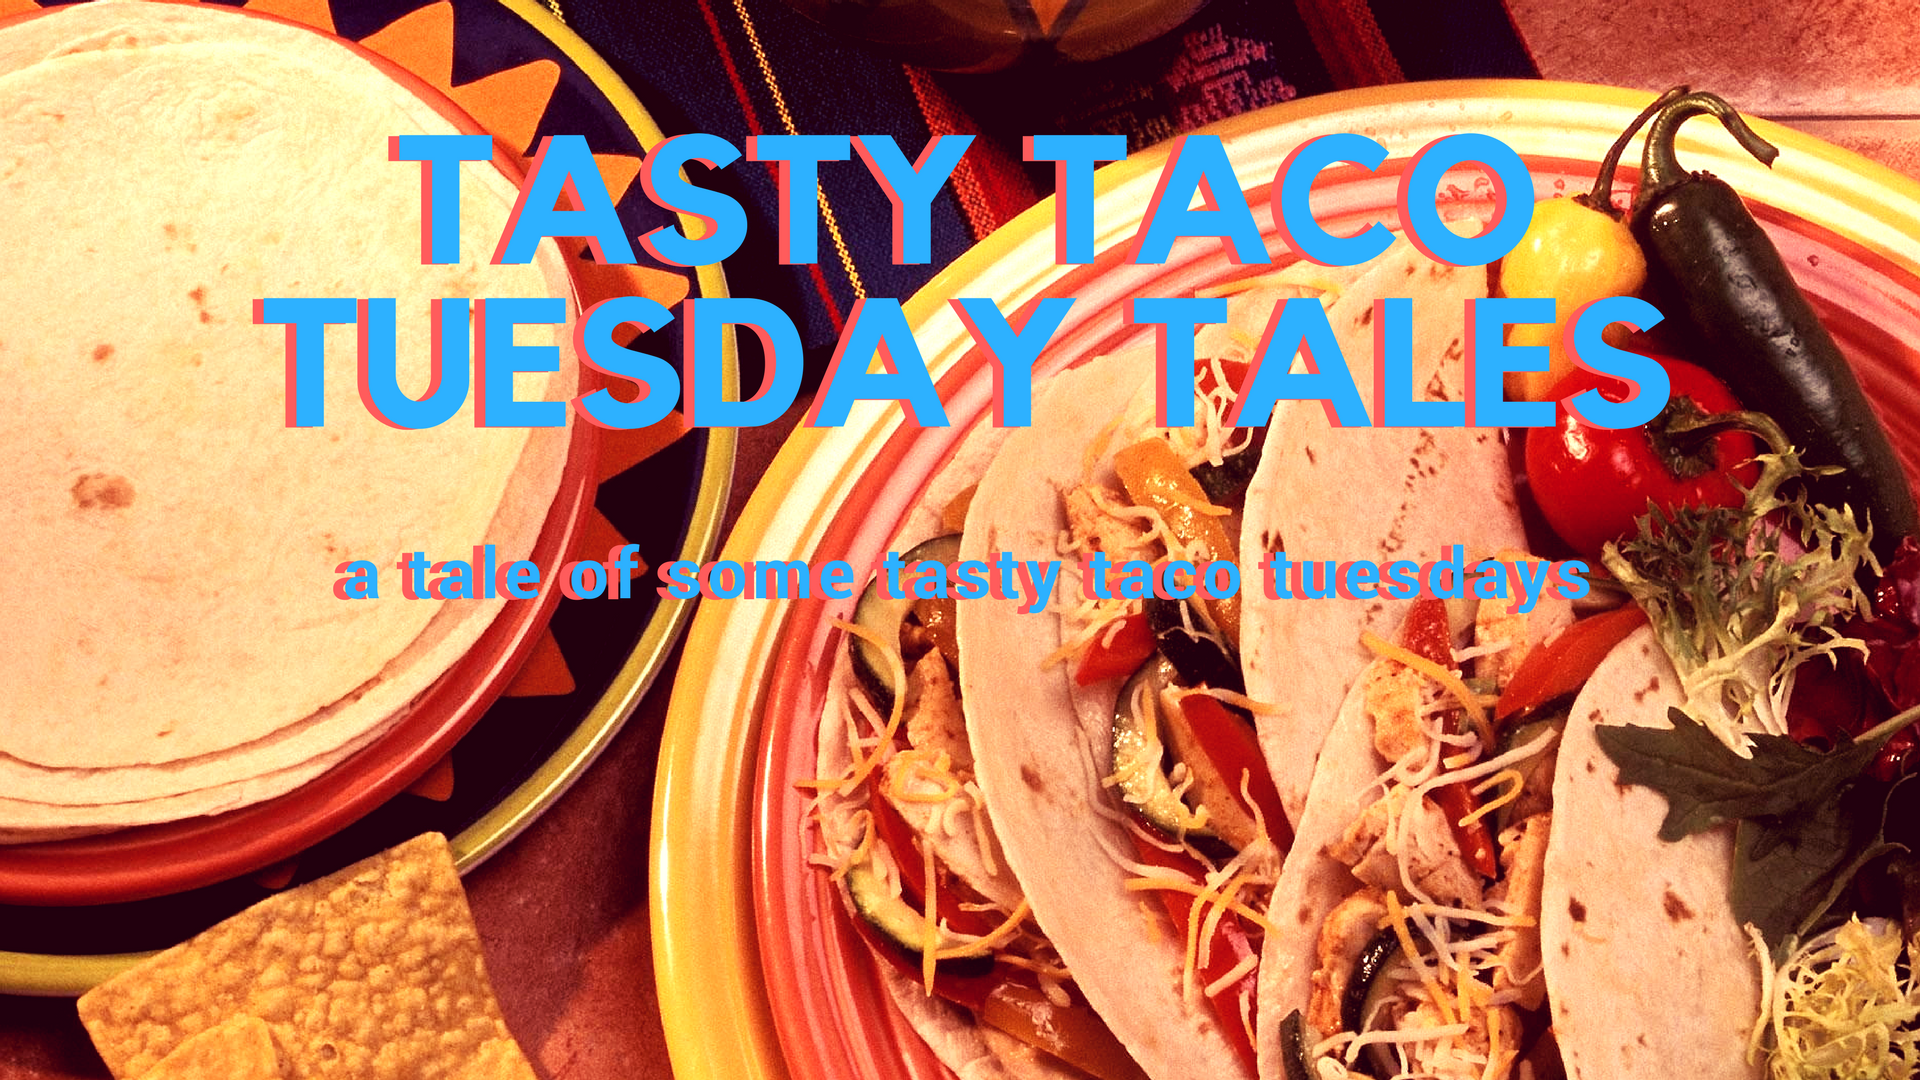 TASTY TACO TUESDAY TALES.png